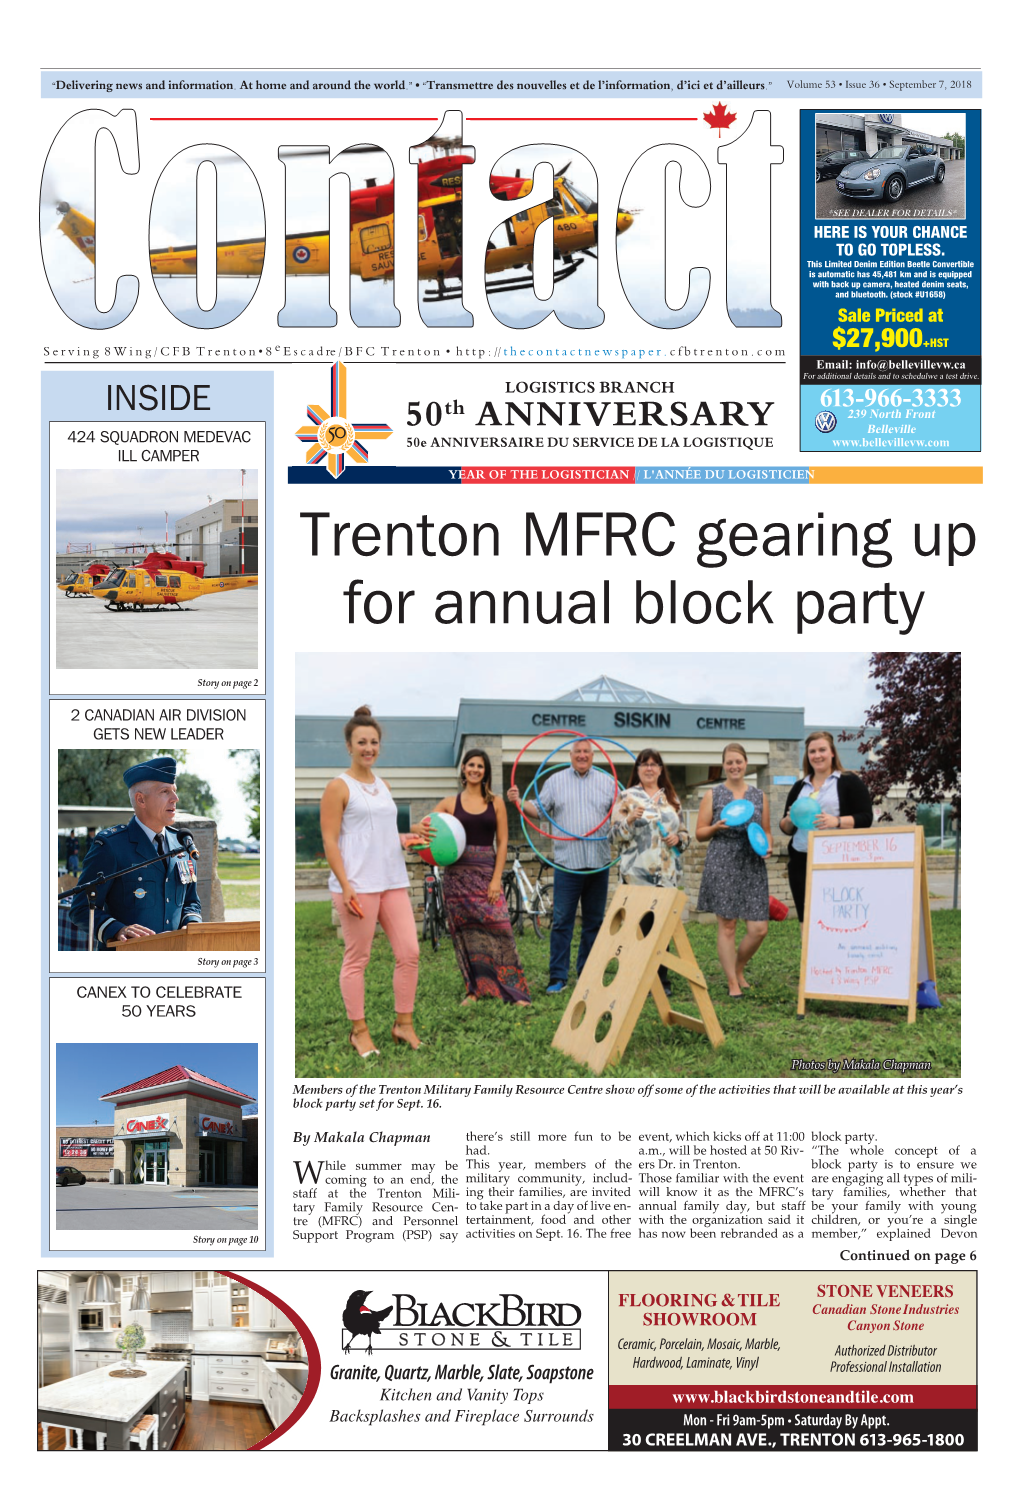 Trenton MFRC Gearing up for Annual Block Party